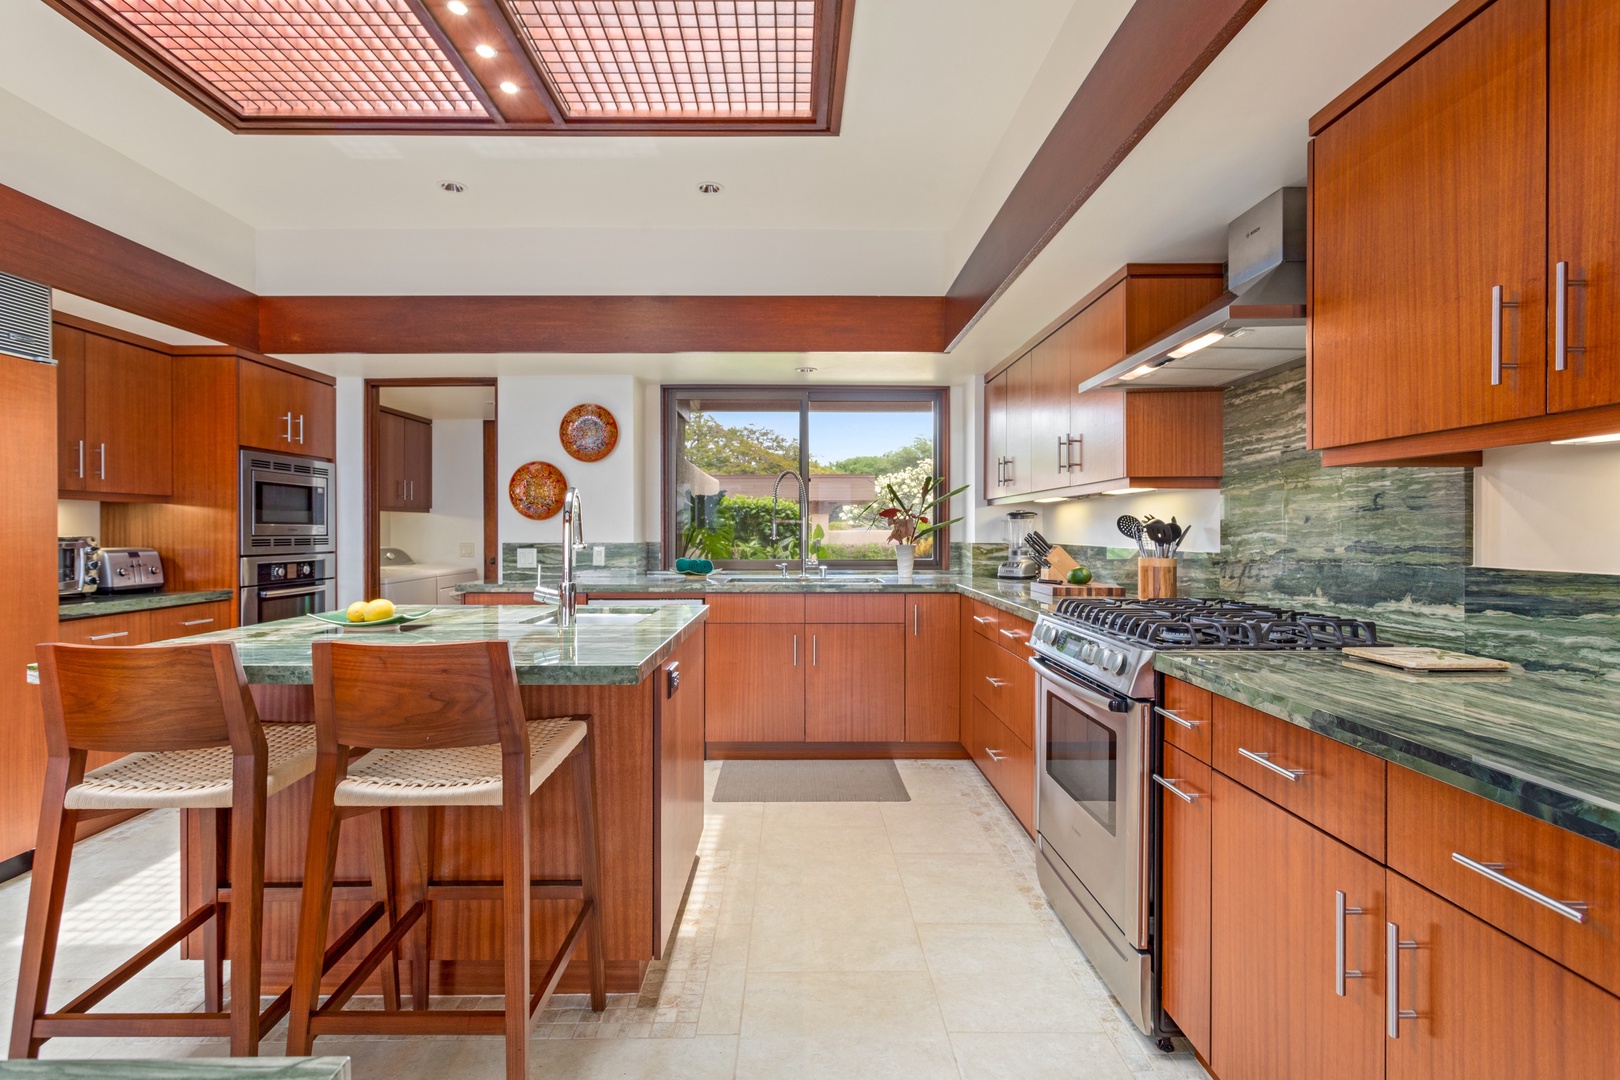 Kamuela Vacation Rentals, 3BD Villas (39) at Mauna Kea Resort - Exquisite modern gourmet kitchen with gorgeous green granite counter tops and gleaming stainless steel appliances.